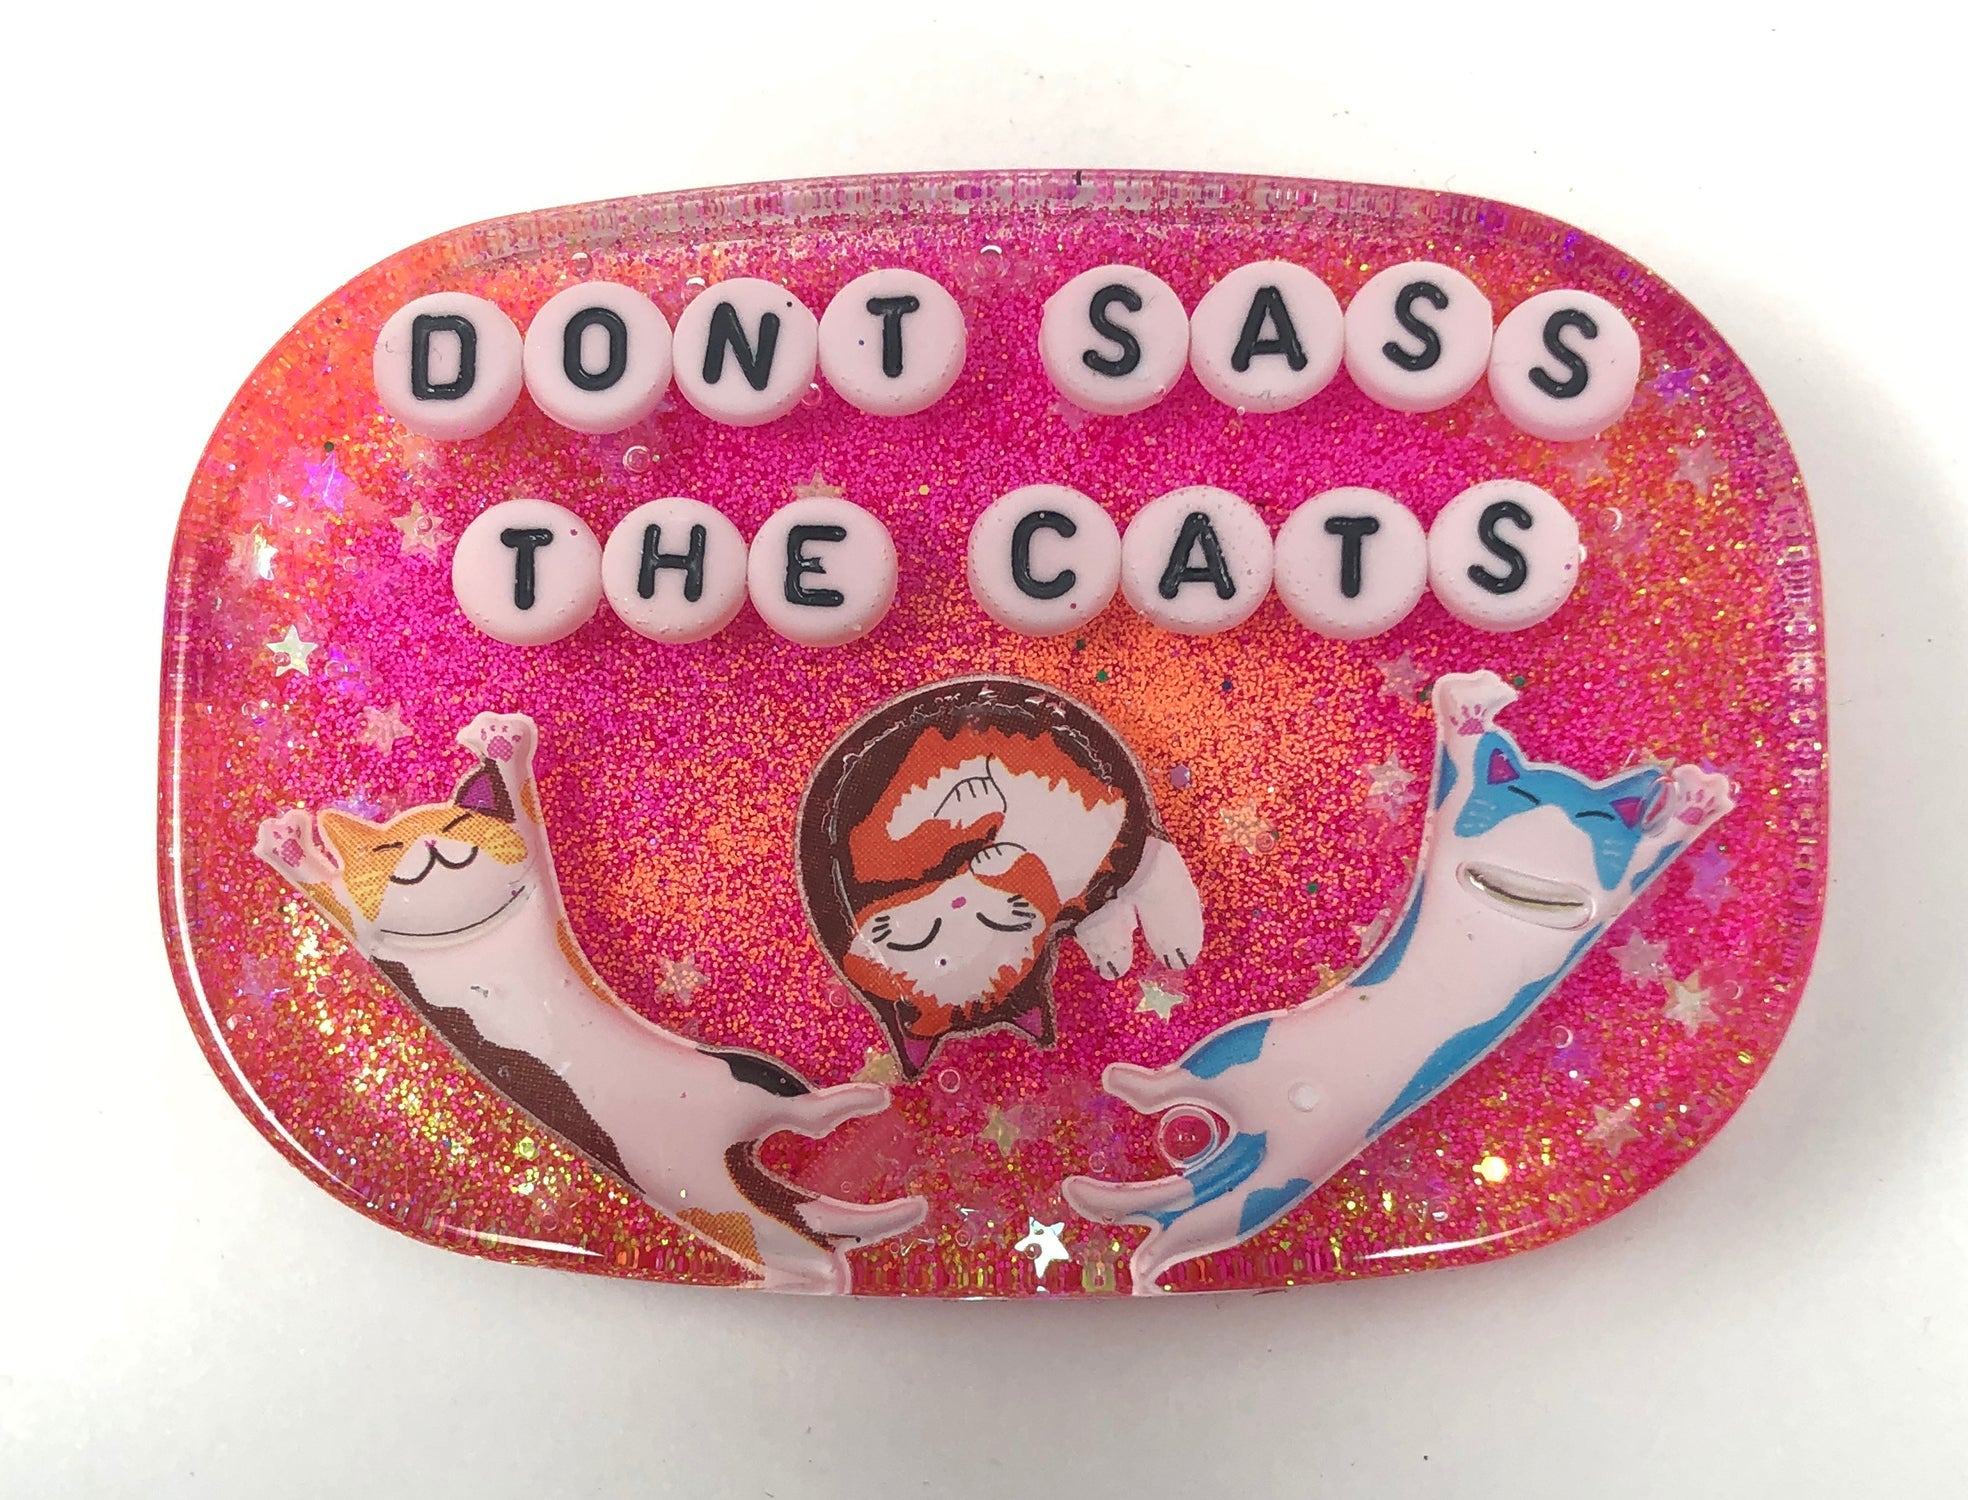 Don't Sass The Cats - Shower Art - READY TO SHIP